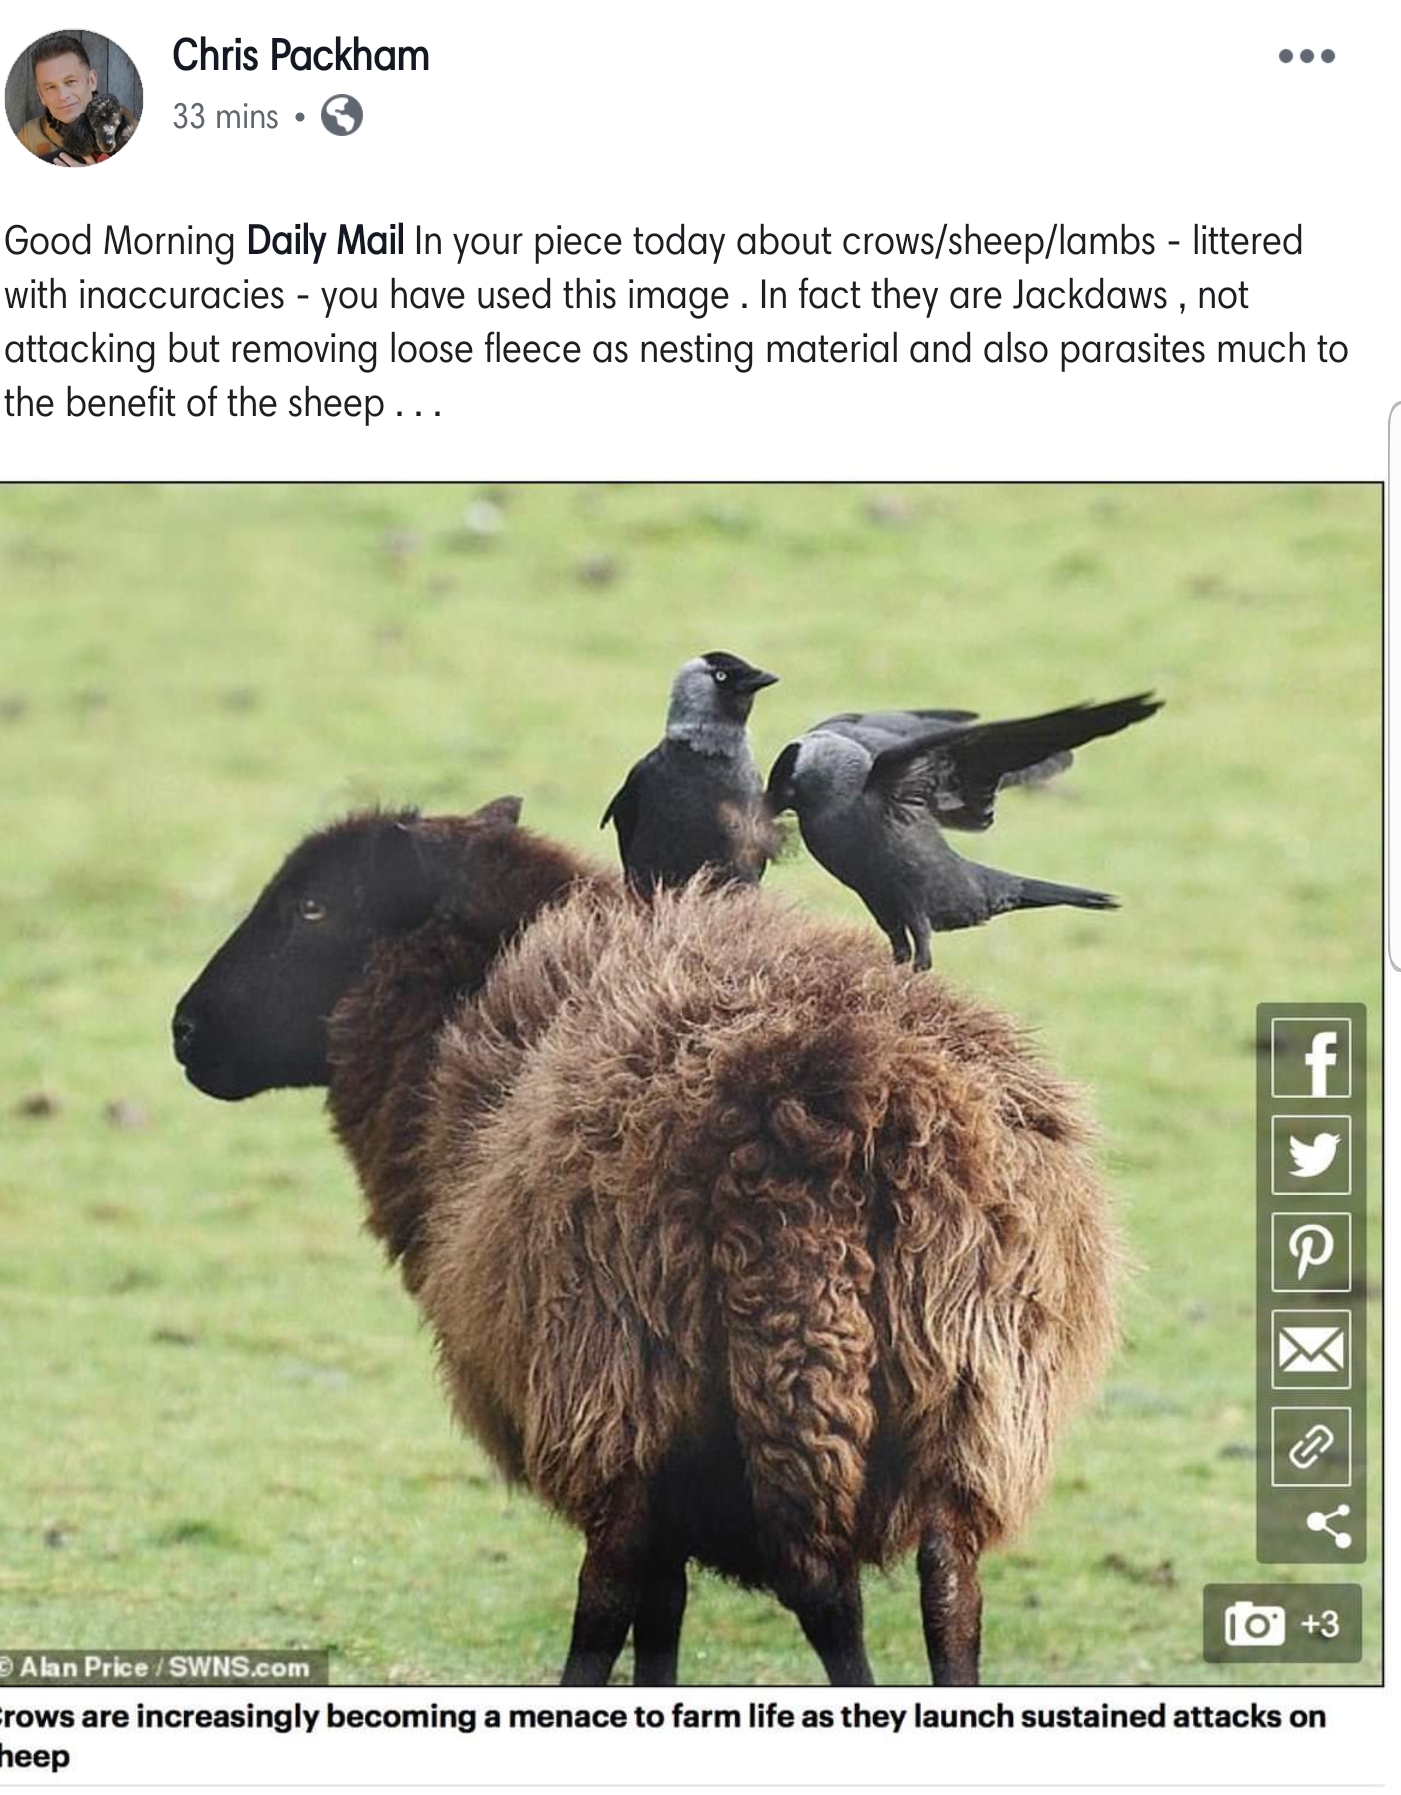 quit your bullshit - . Good Morning Daily Mail In your piece today about crowssheeplambslittered with inaccuracies you have used this image. In fact they are Jackdaws, not attacking but removing loose fleece os nesting material and also parasites